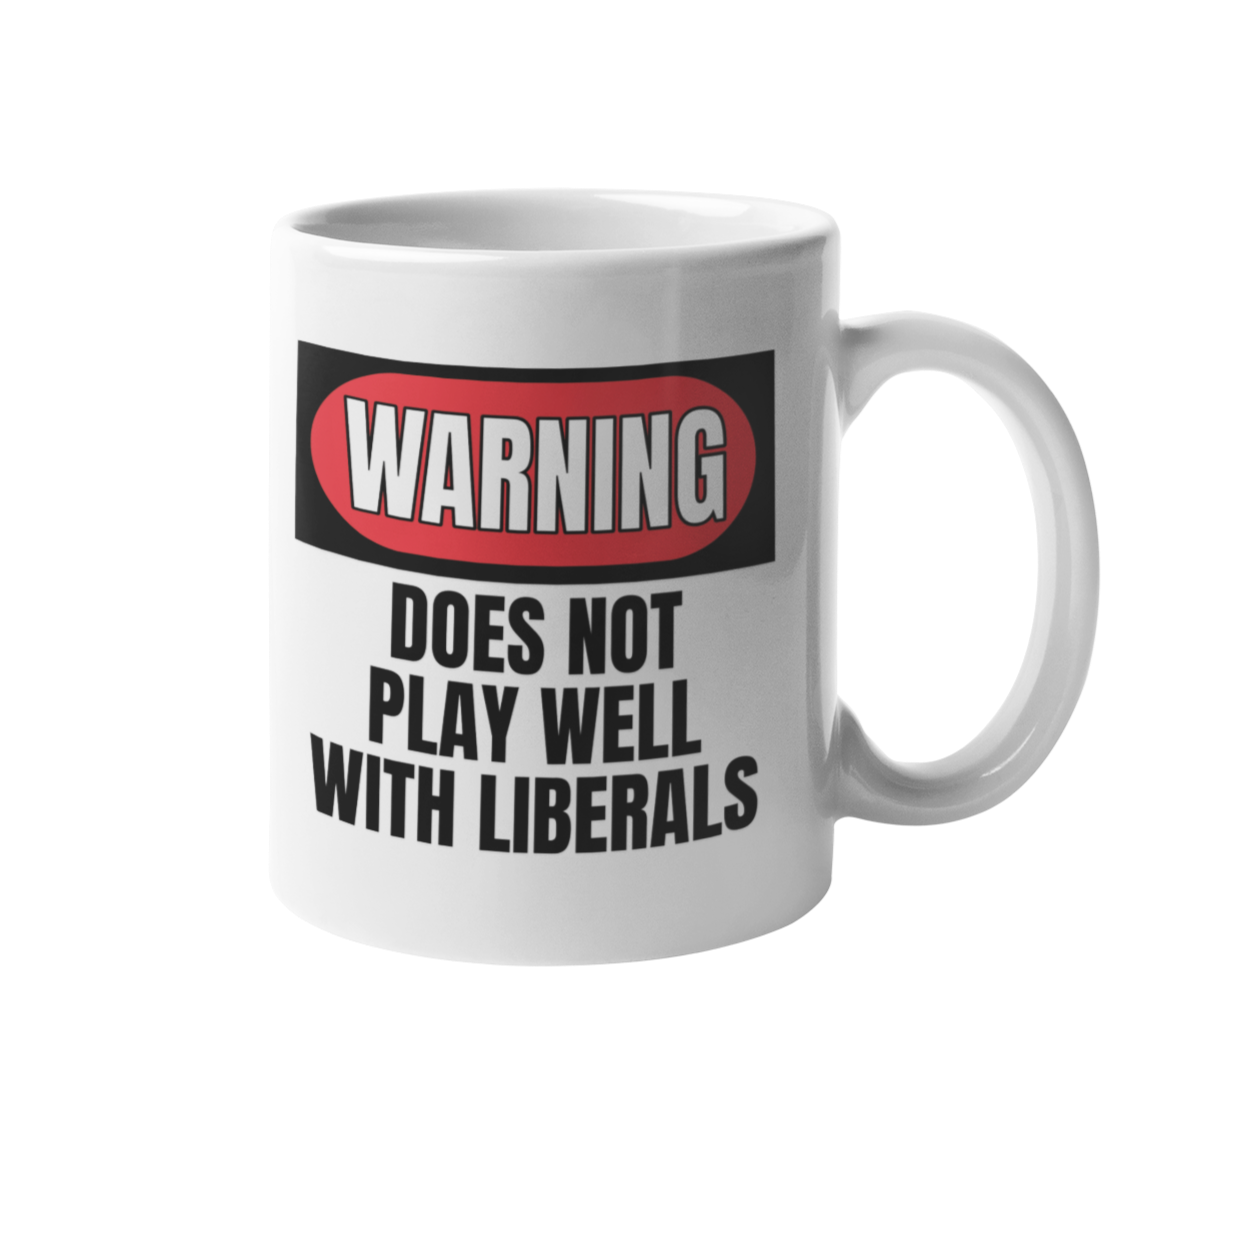 "Does Not Play Well With Liberals" Mug